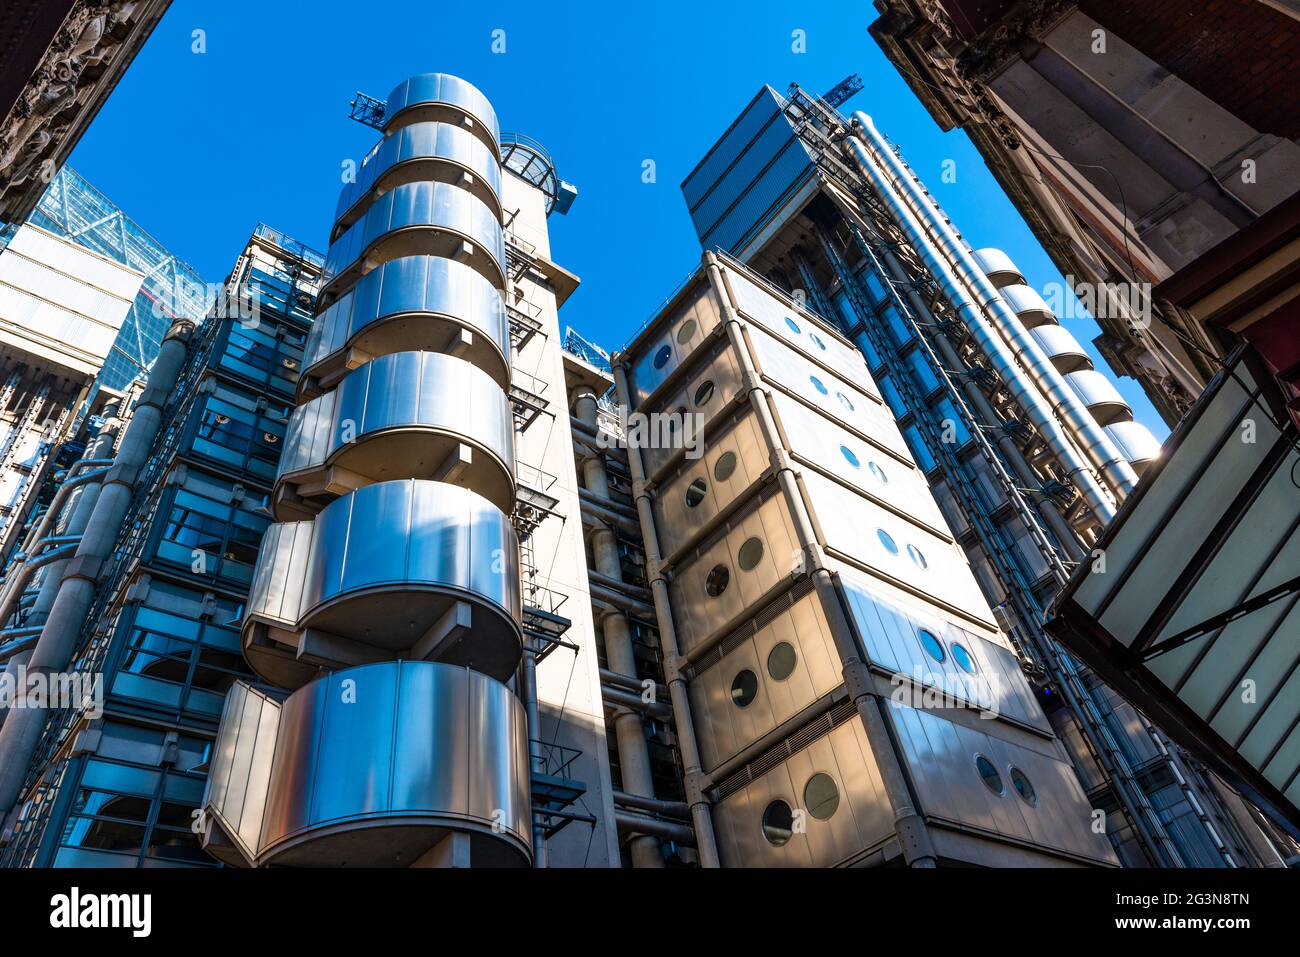 Lloyds Insurance Building in Lime Street, London. Also known as the Inside Out Building, due to it's unusual design features. Stock Photo